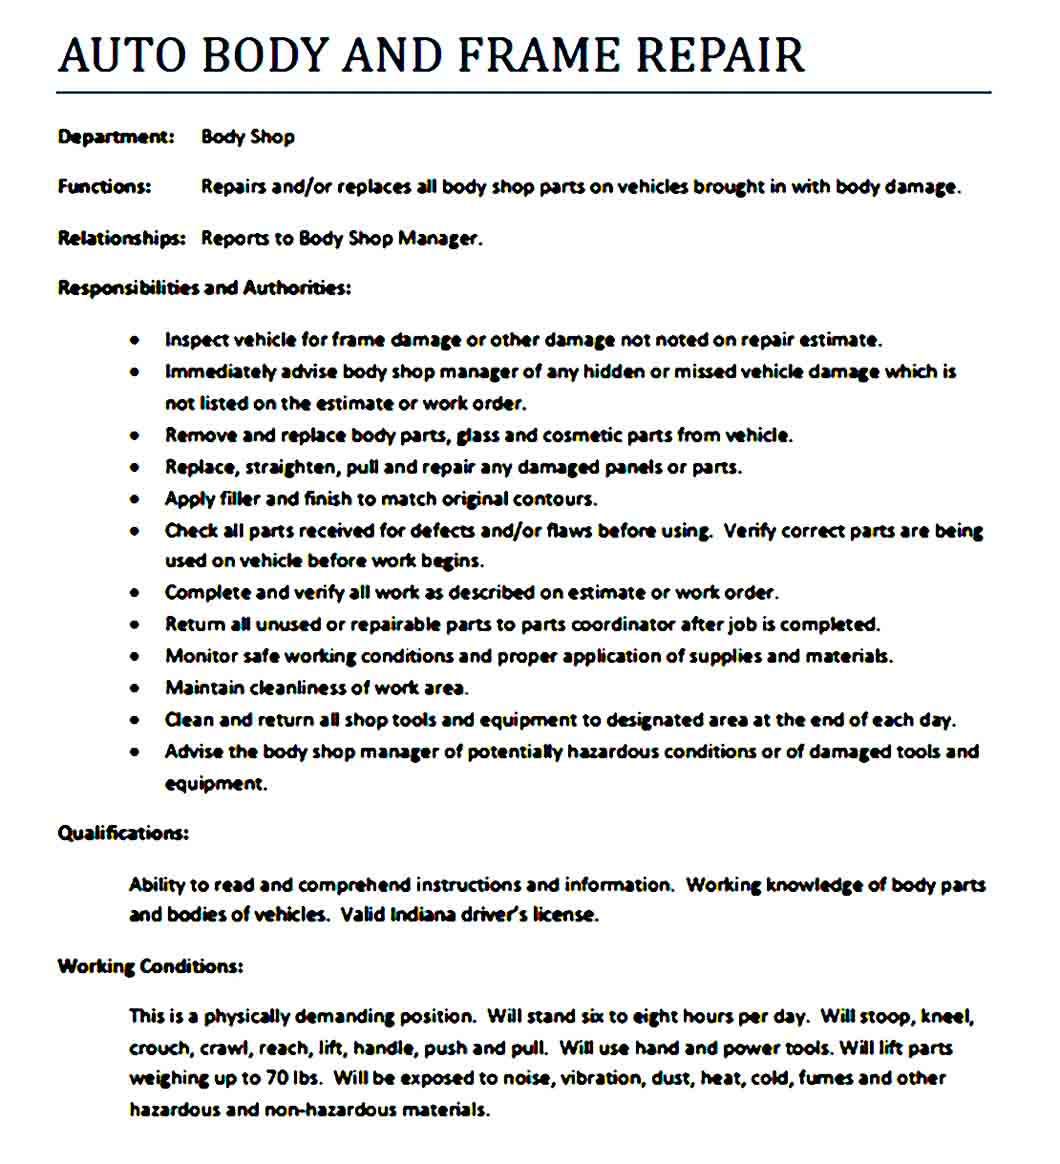 AUTO BODY AND FRAME REPAIR